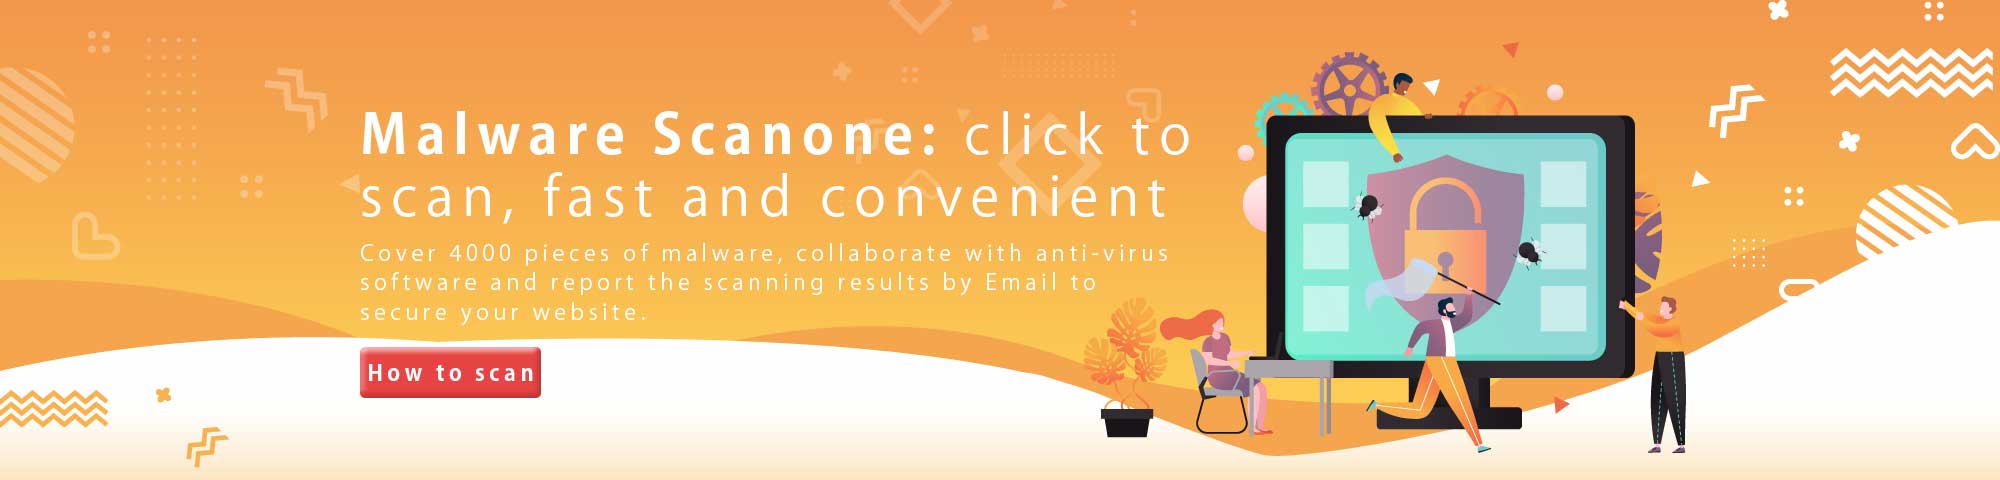 Malware scanone:click to scan,fast and convenient